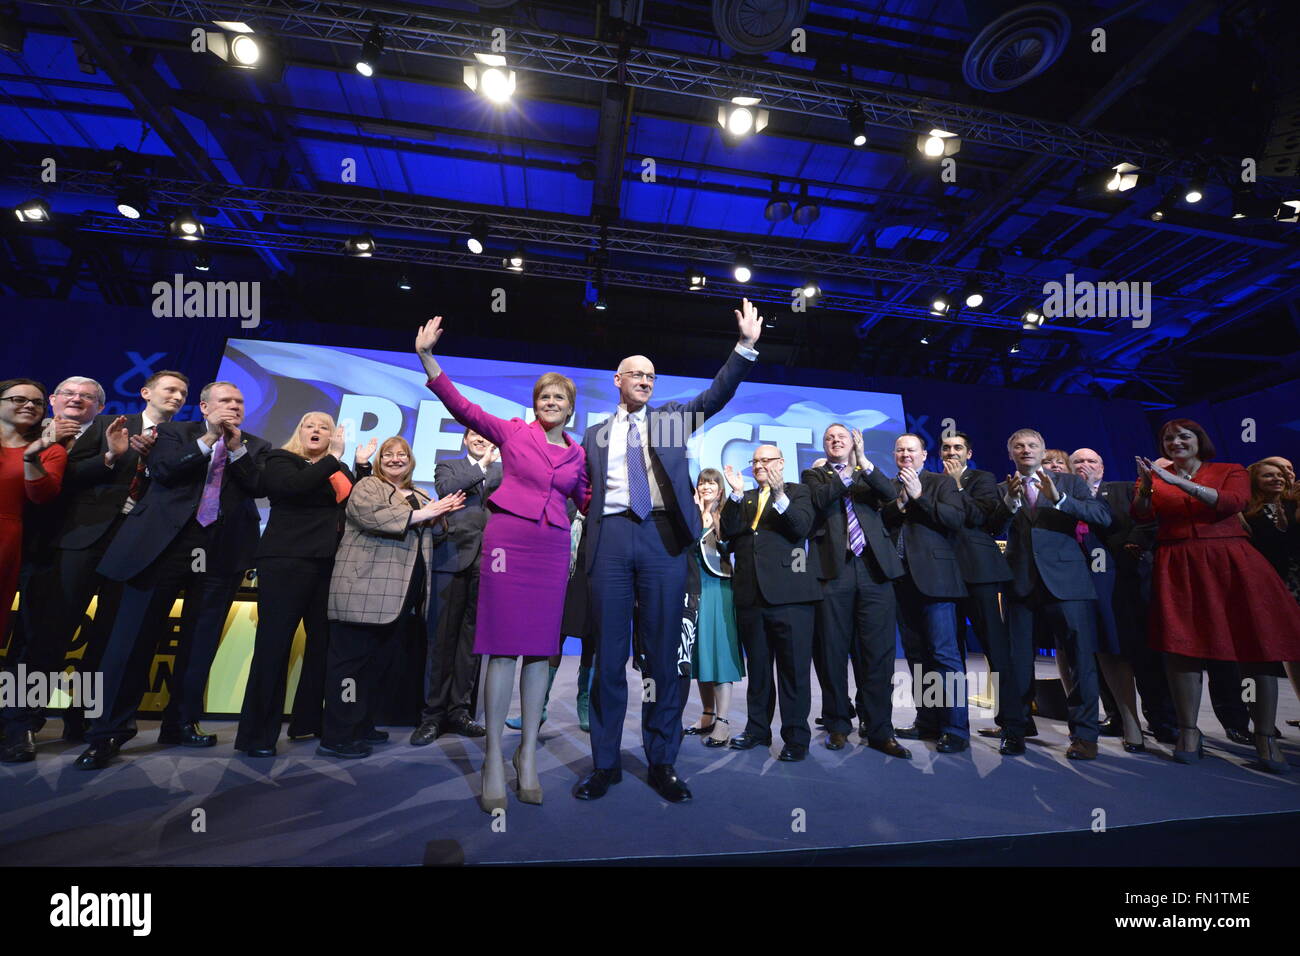 Glasgow, Scotland, GBR - 13  March: Nicola Sturgeon, First Minister of Scotland and SNP Leader and John Swinney, Depute Leader,  with current and prospective MSPs on the final day of the  Scottish National Party Spring Conference took place Sunday 13 March 2016 in Glasgow, Scotland. Stock Photo